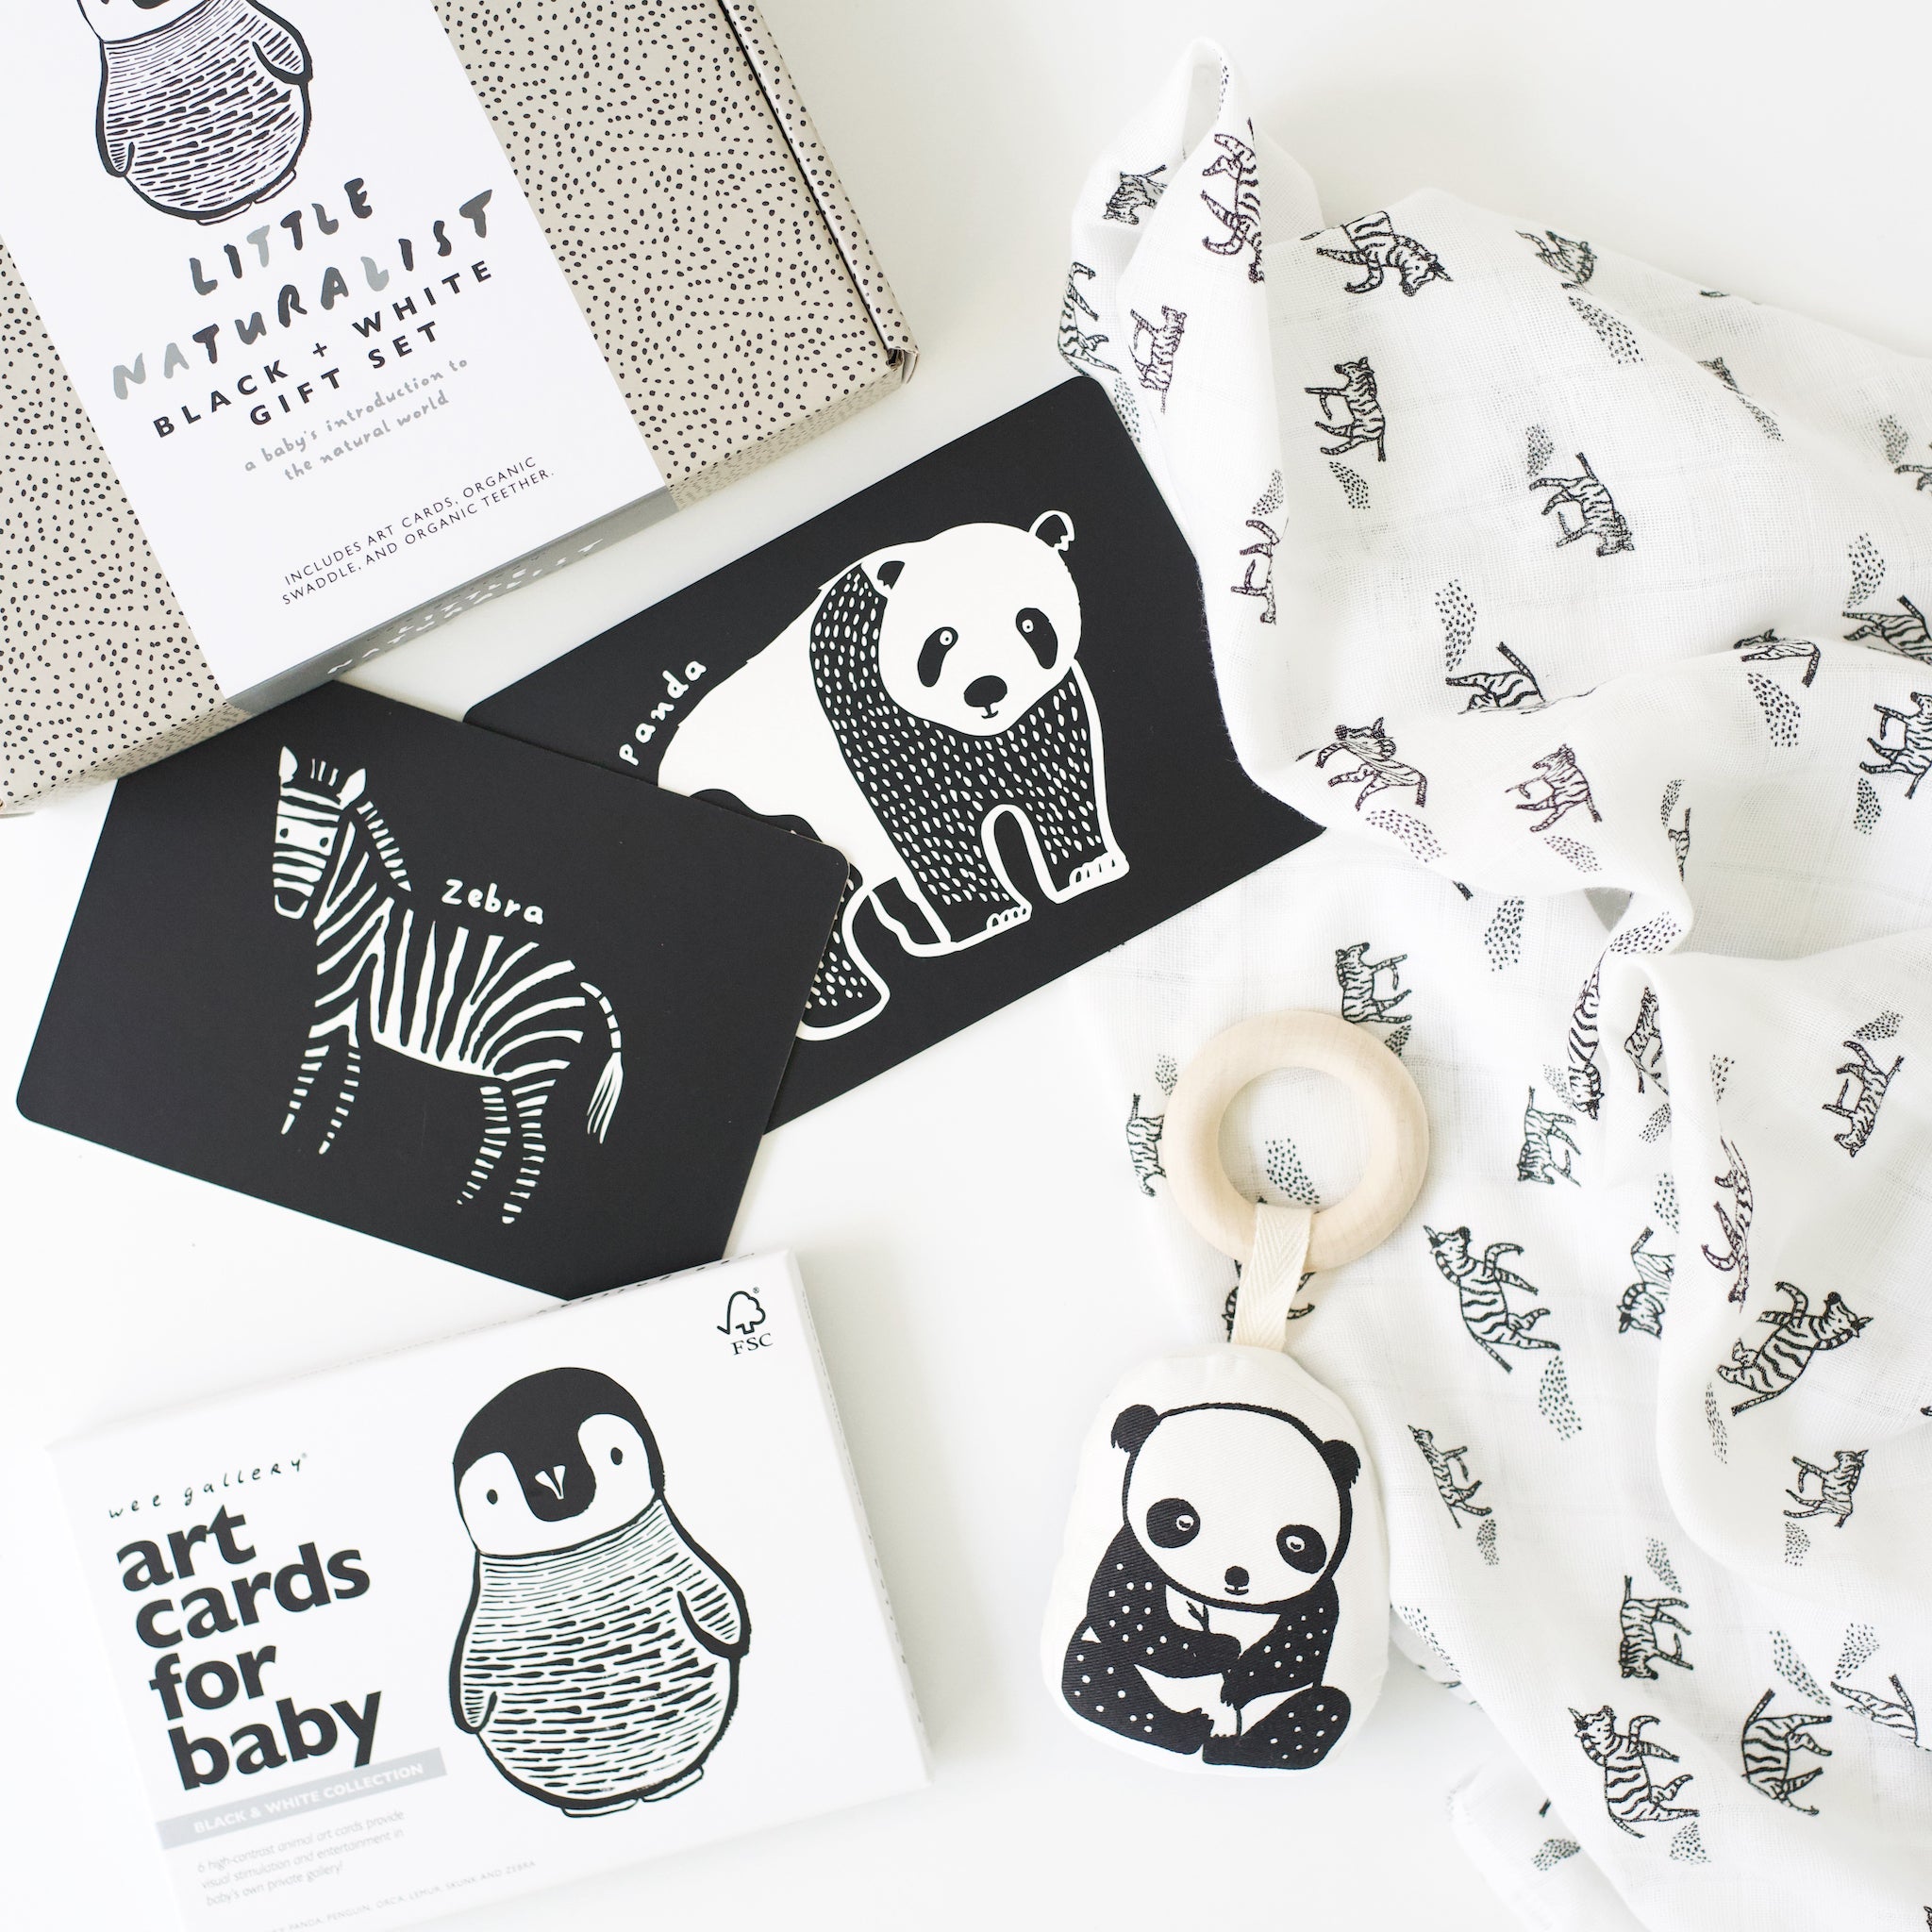 organic-unisex-high-contrast-gift-set-for-baby-newborn-2-3-4-5-months-black-and-white.jpg